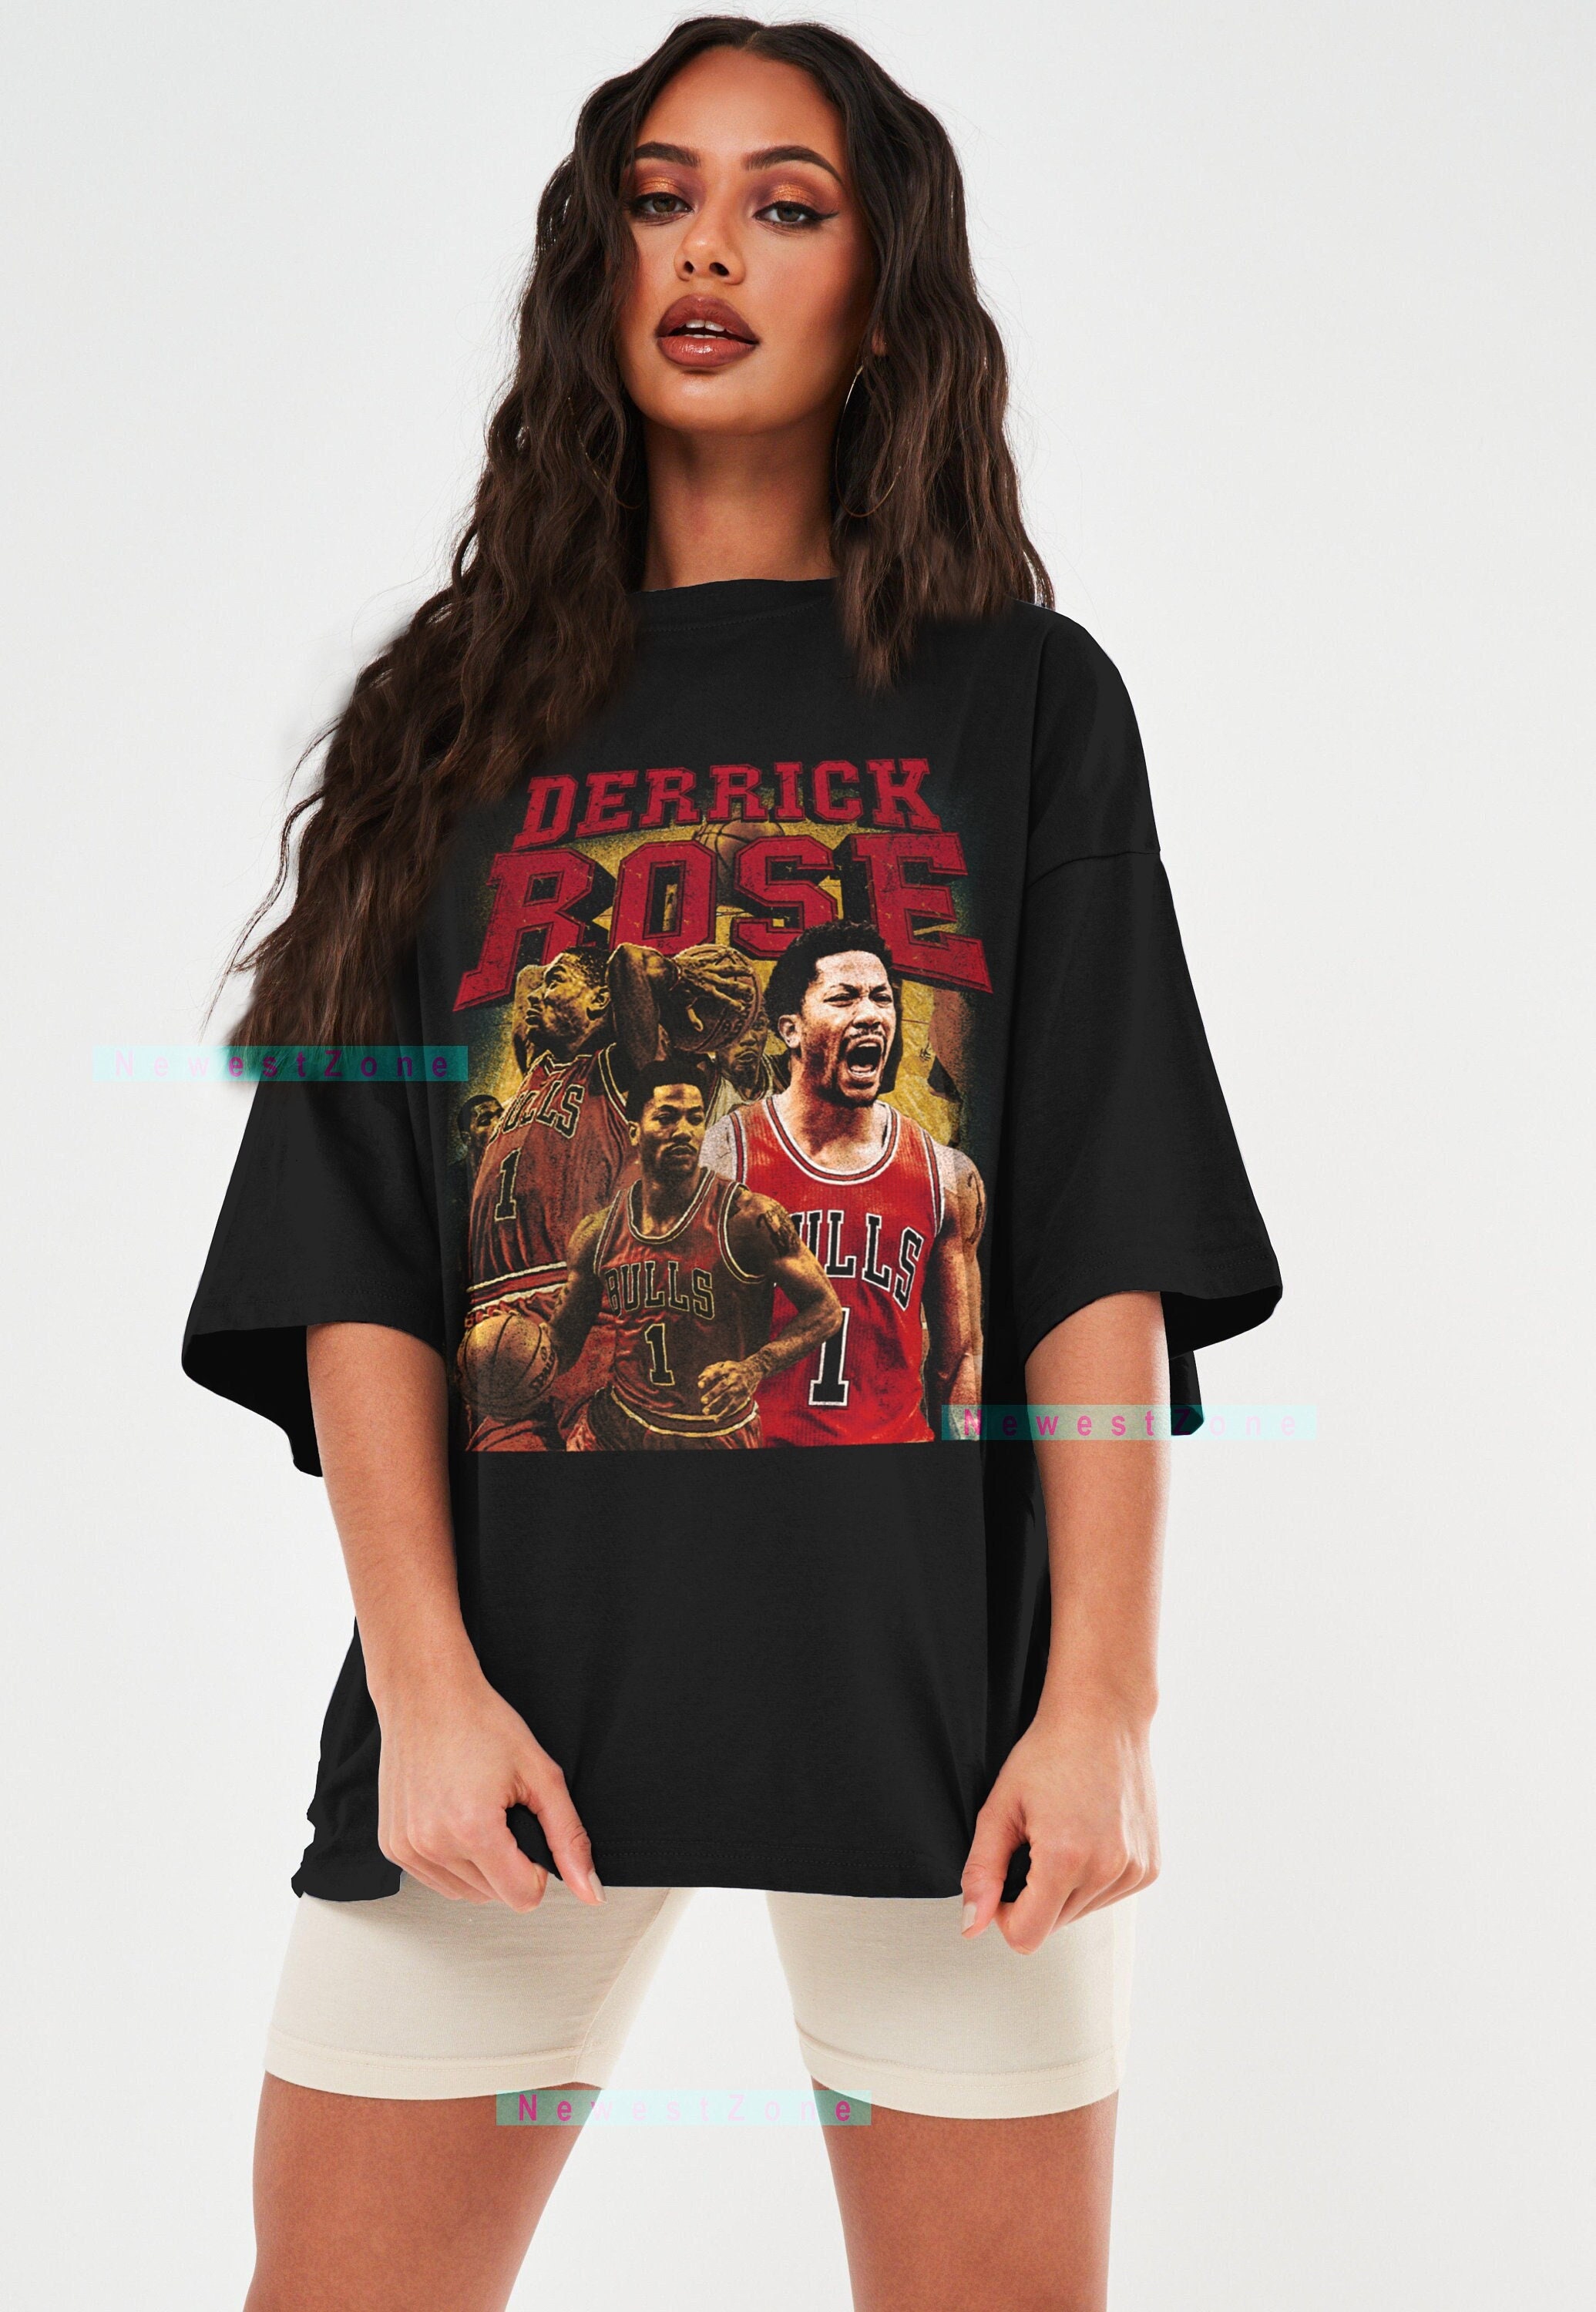 Shop Chicago Bulls Jersey Rose 1 with great discounts and prices